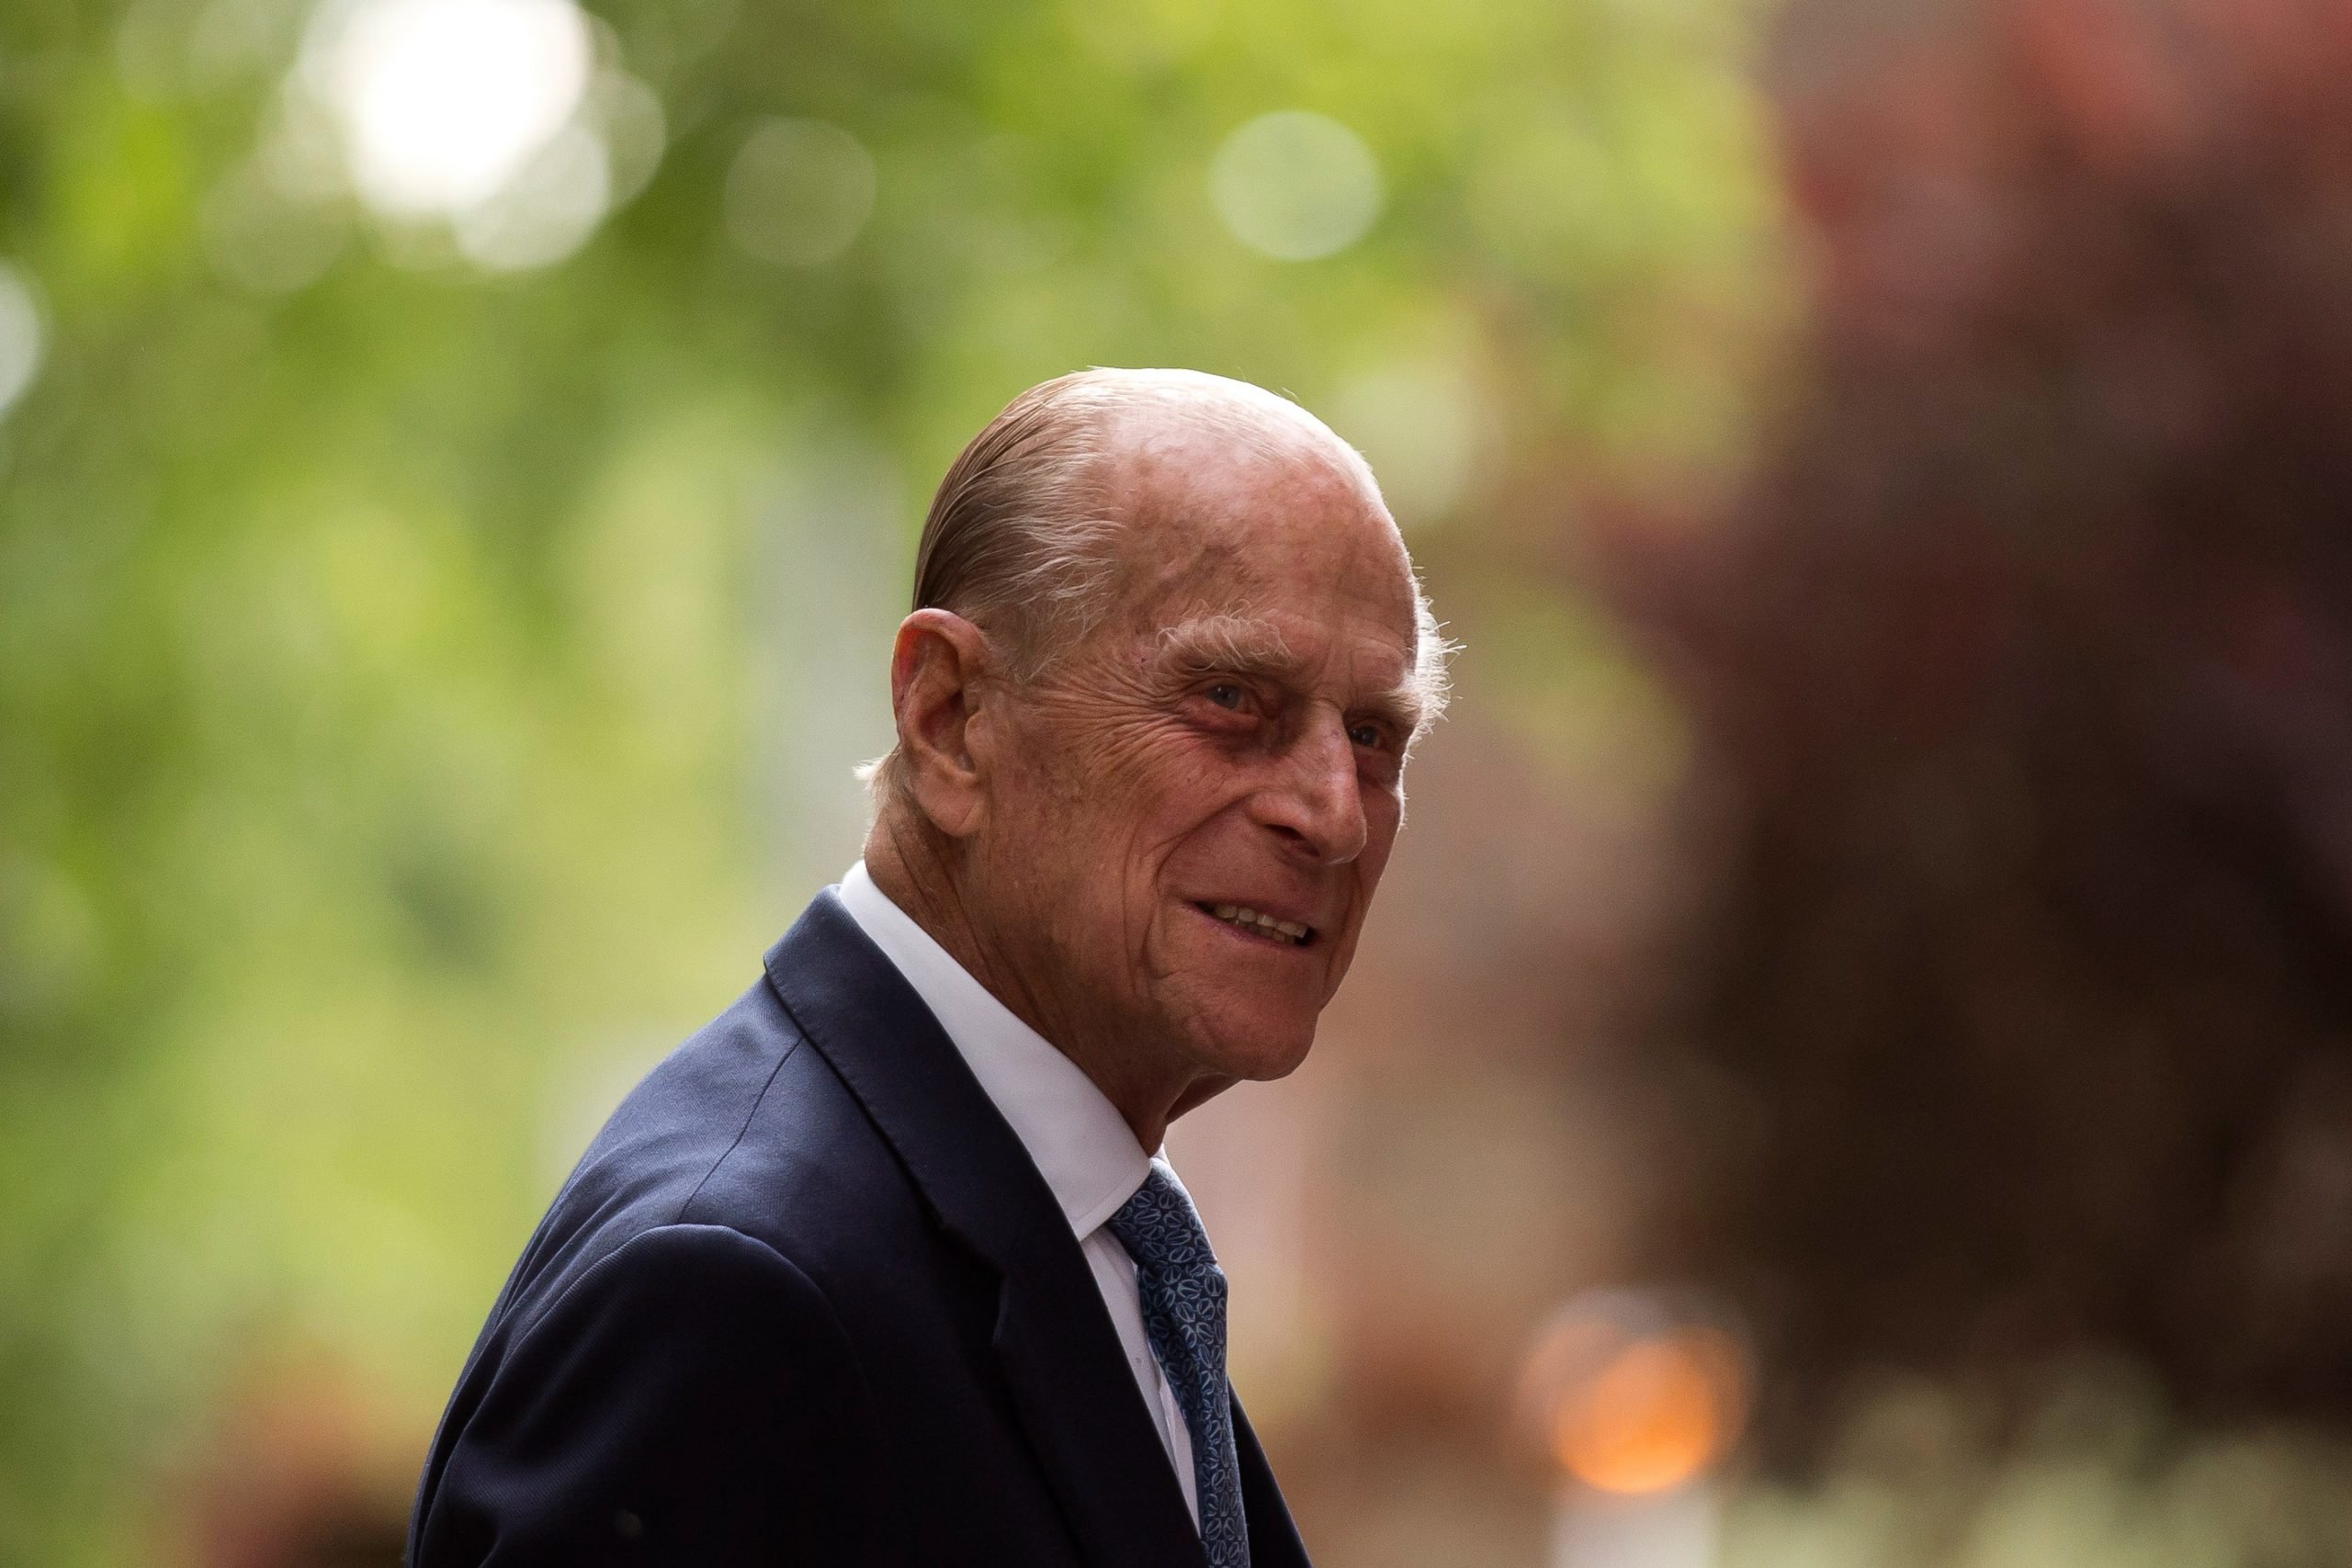 Prince Philip’s Death Resurrects His Problematic Comments Against Women